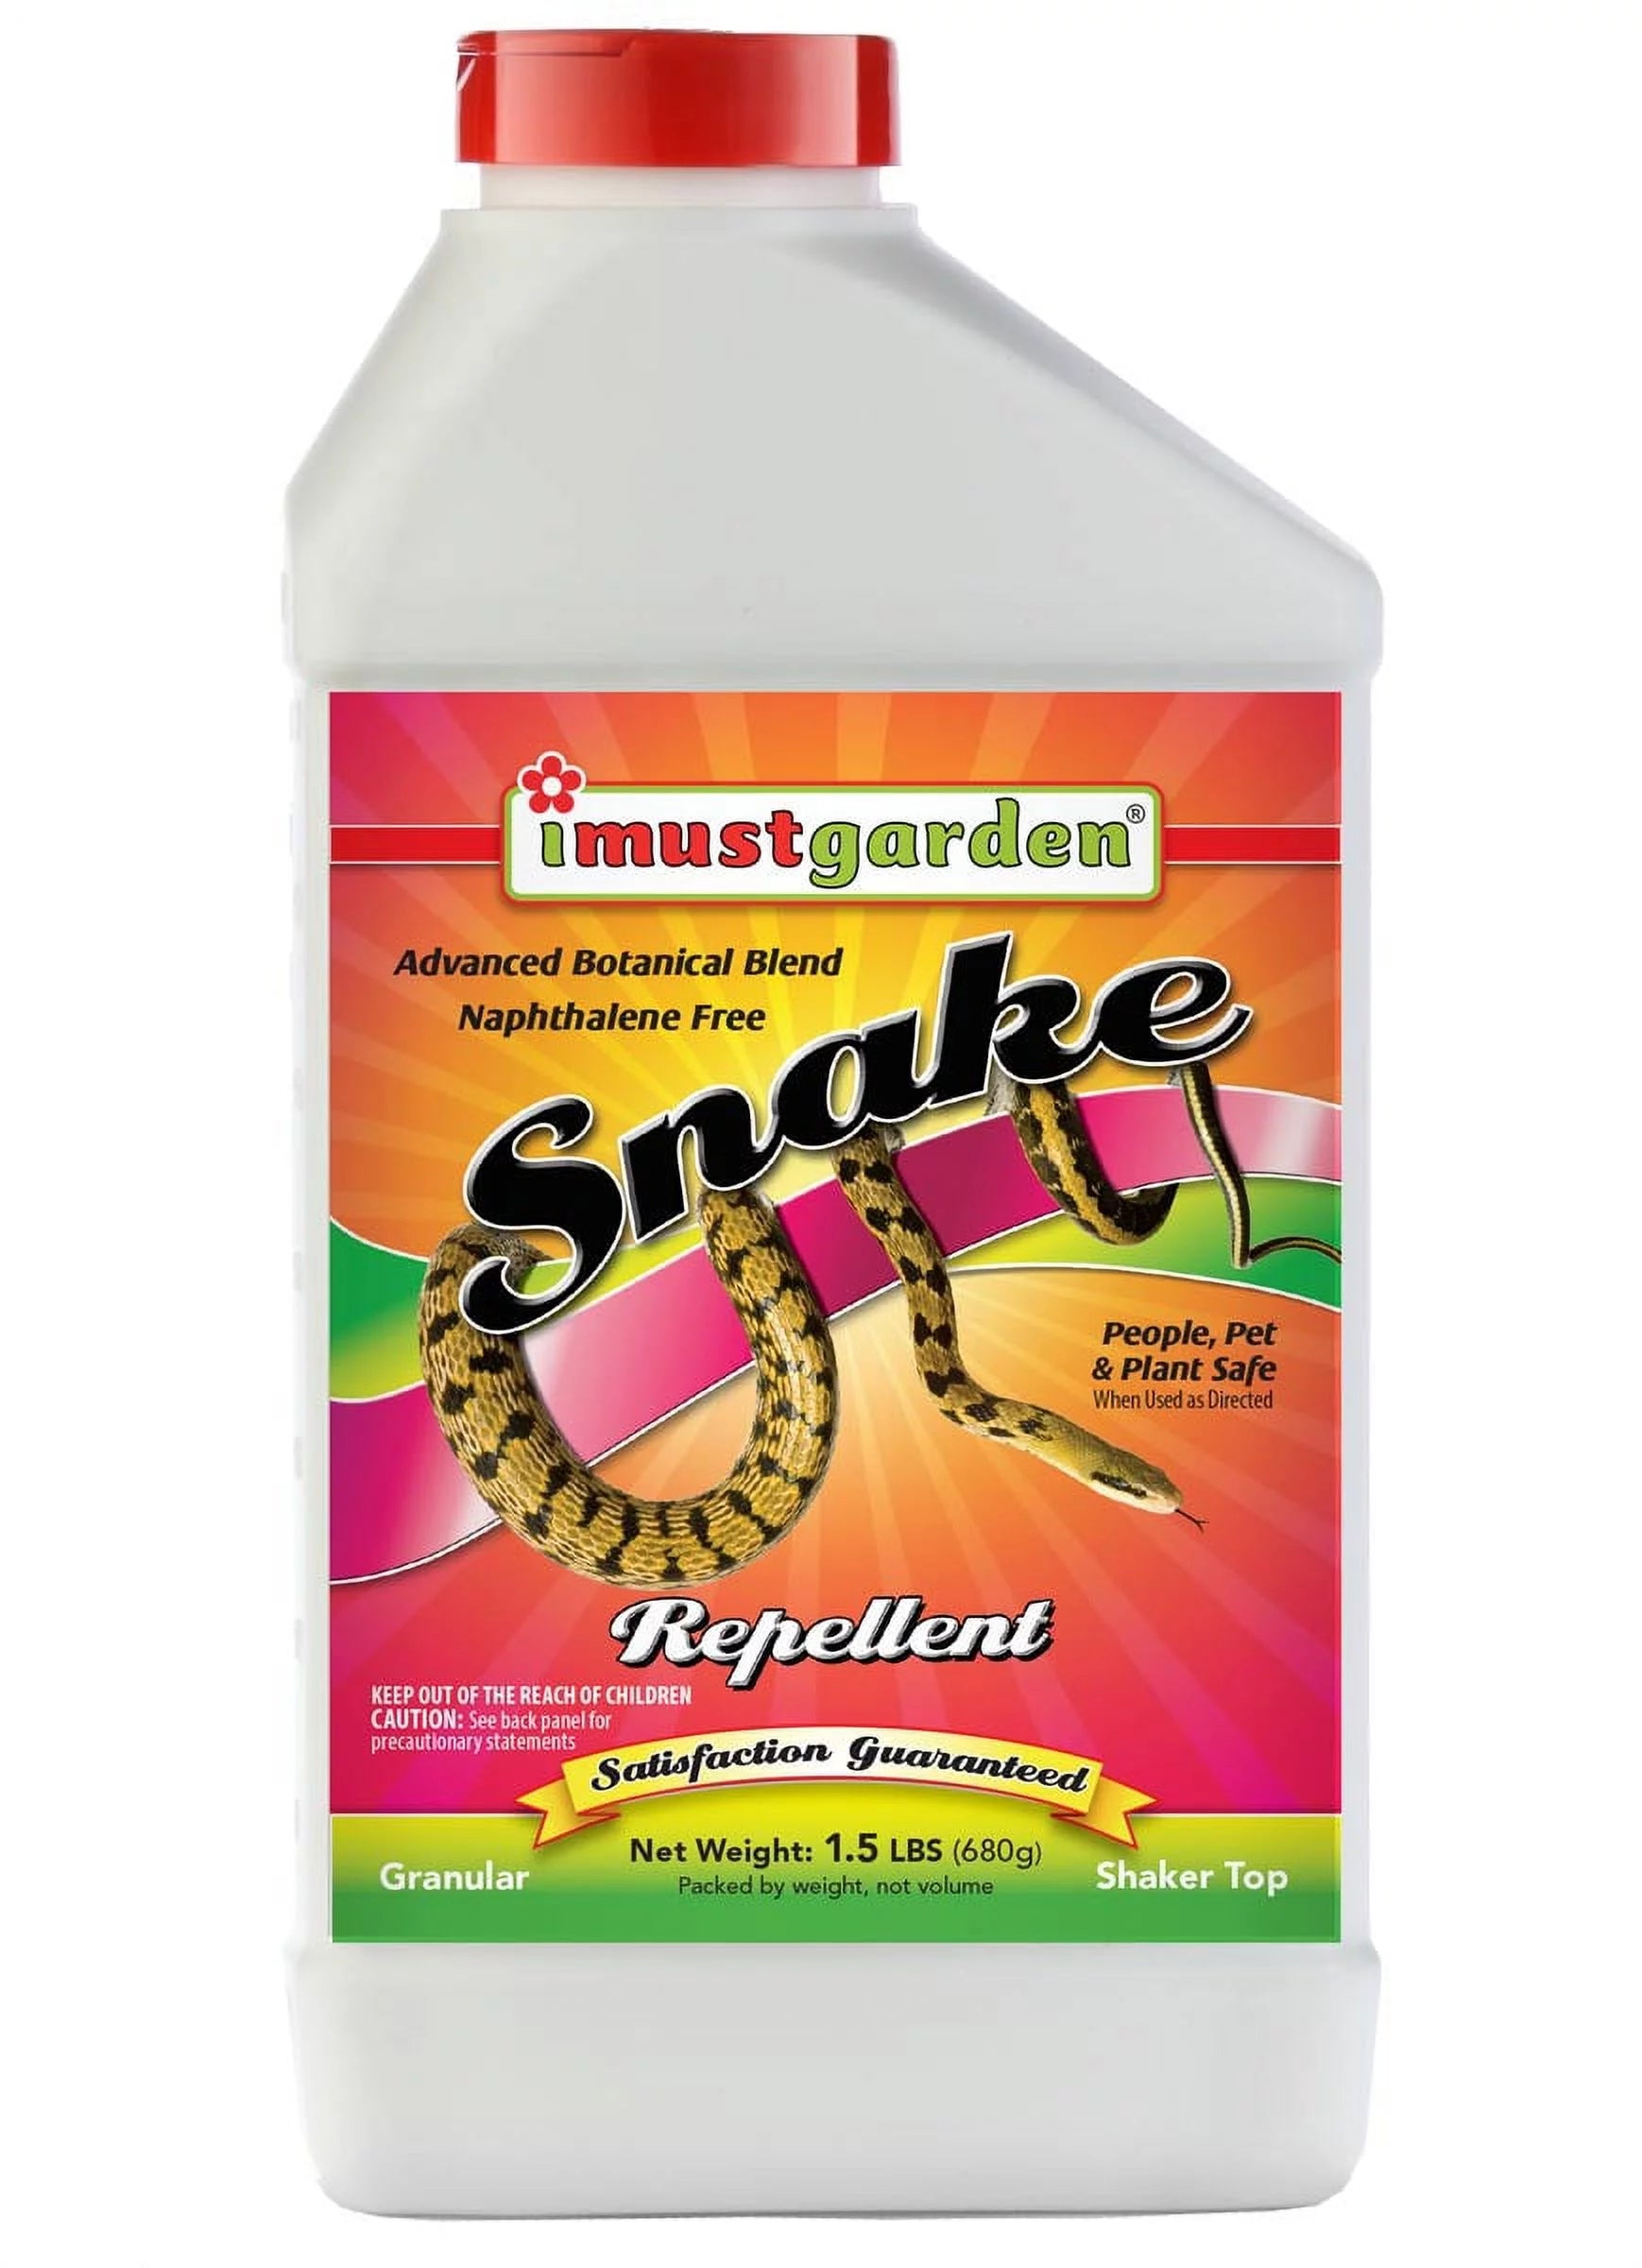 All natural snake repellent granules for lawns and garden beds